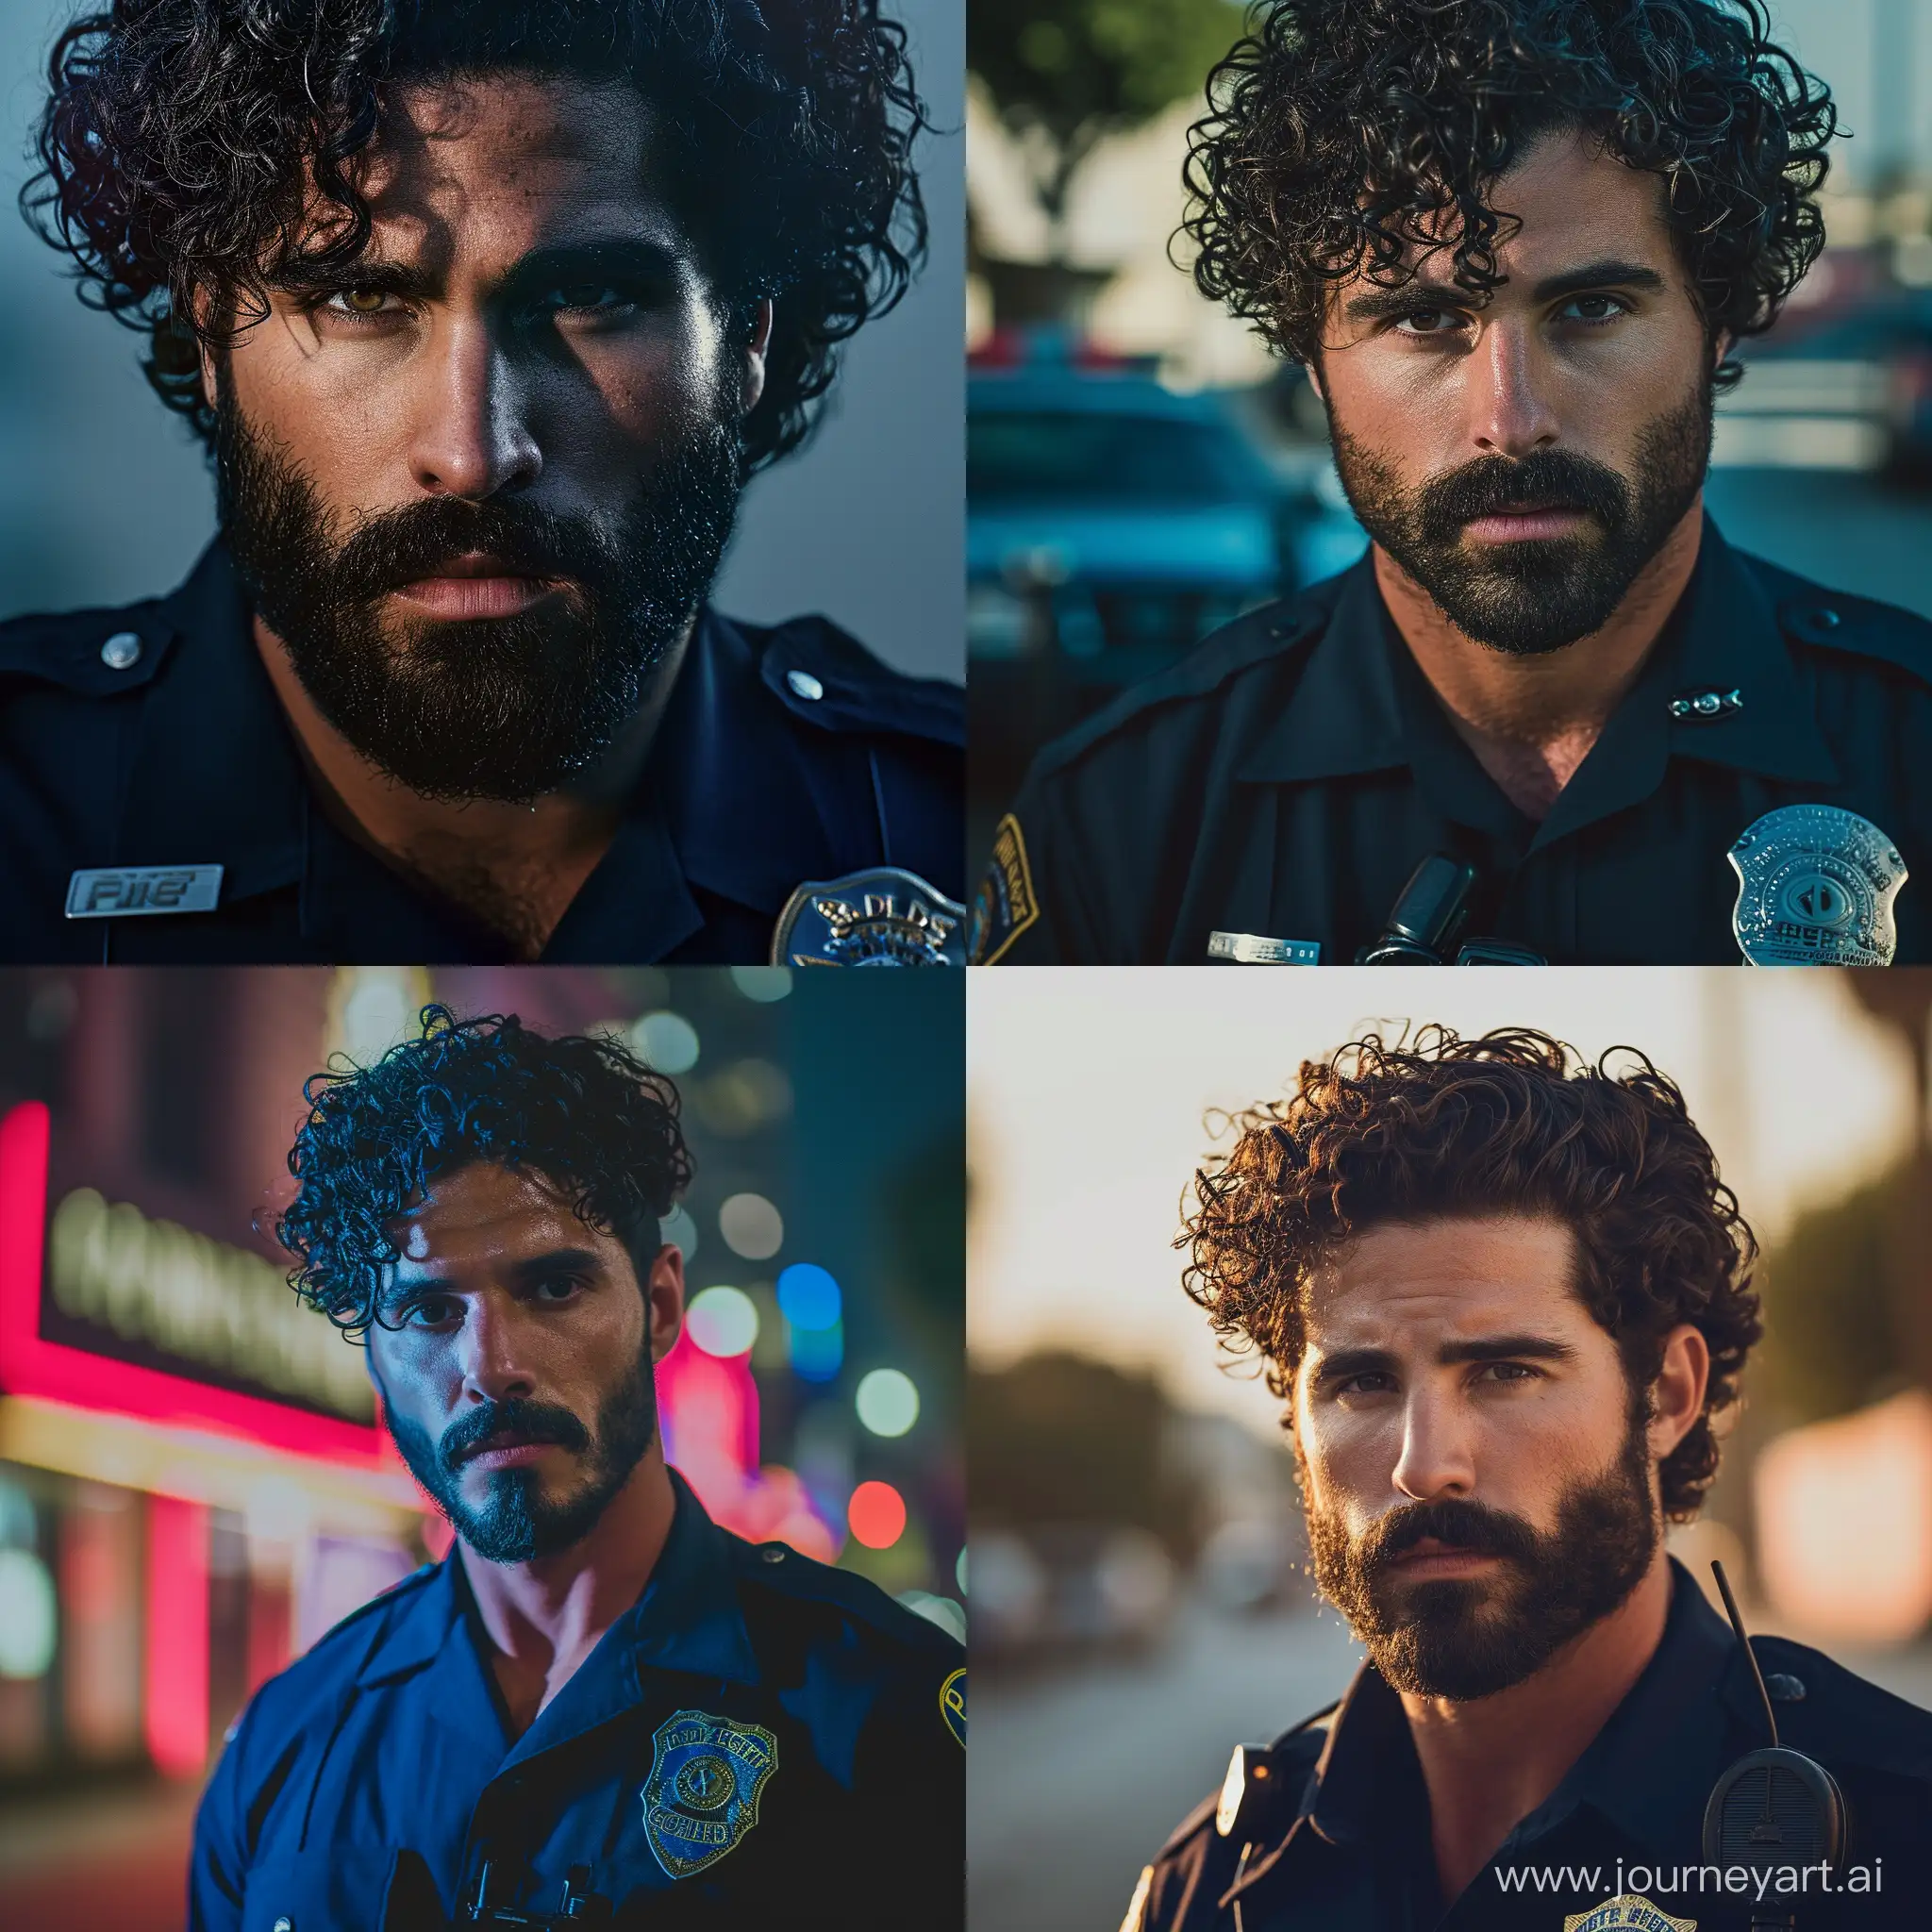 Stylish-Police-Officer-on-a-Crucial-Mission-in-Stunning-4K